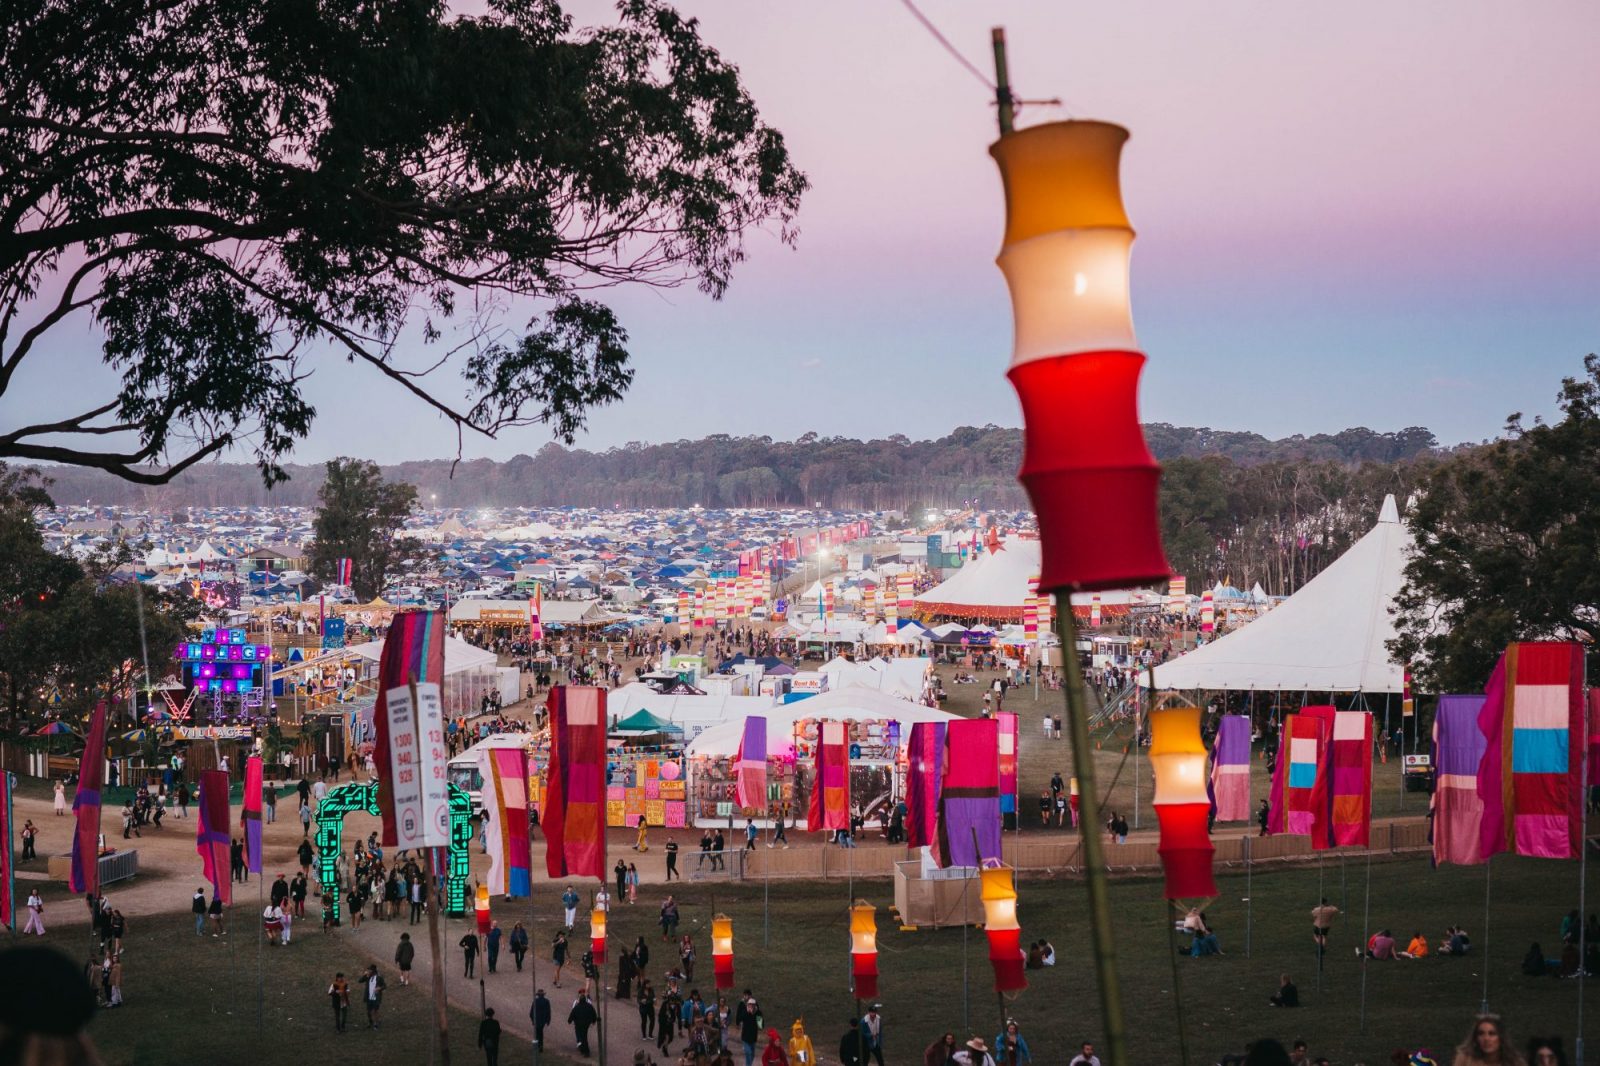 A comprehensive list of the Australian music festivals you can't miss